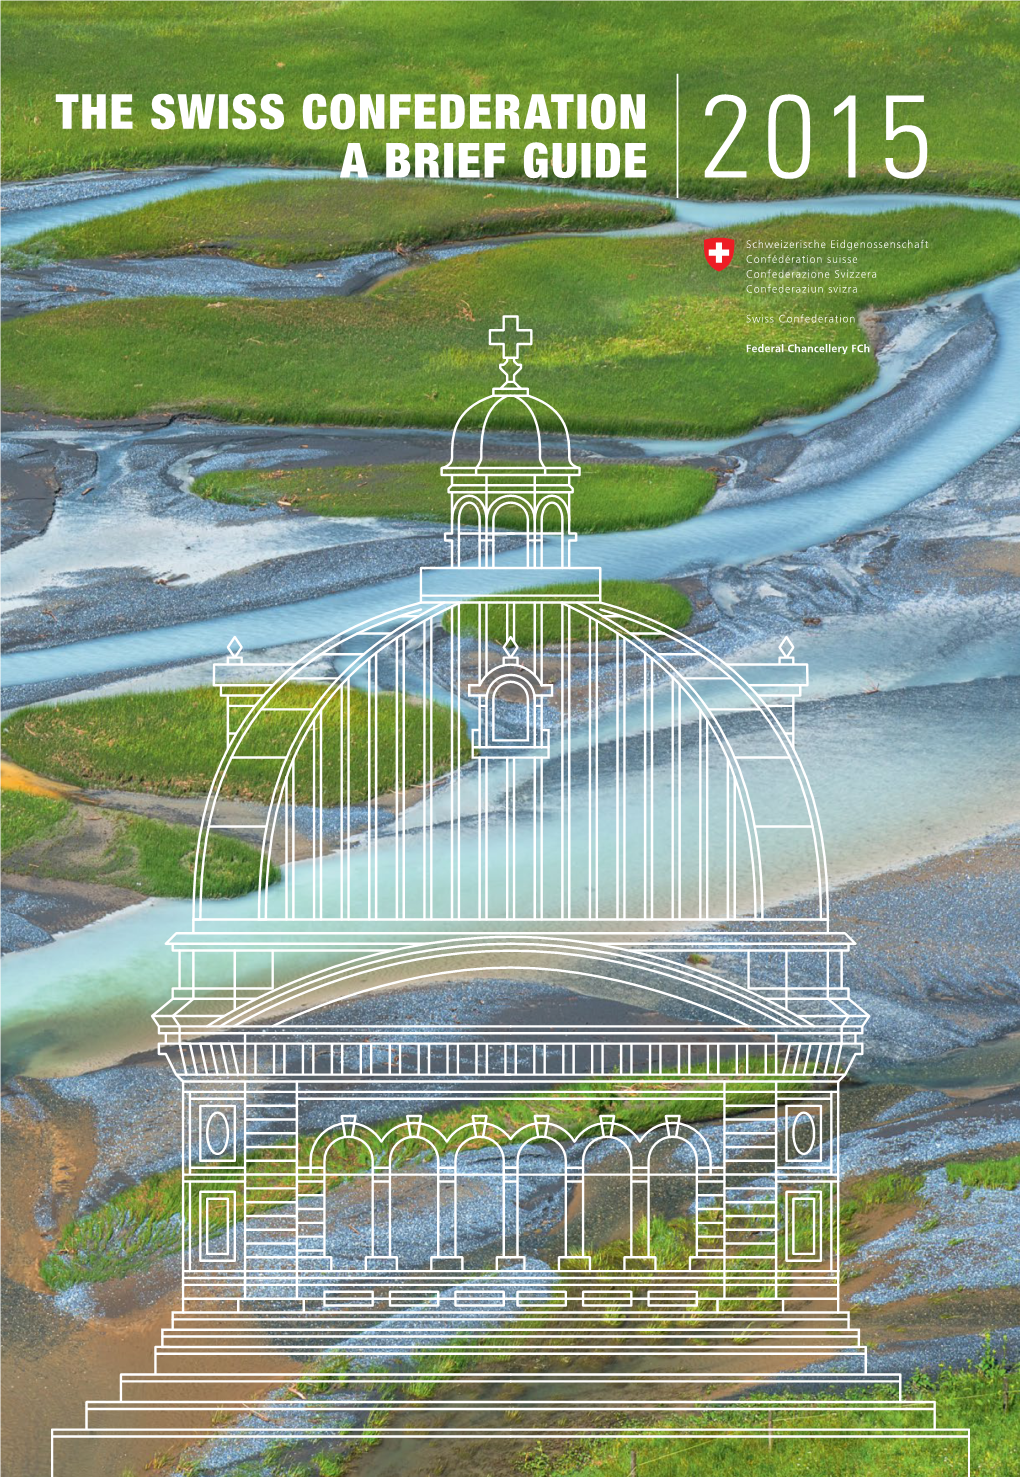 THE SWISS CONFEDERATION a BRIEF GUIDE 2015 Cover for Years, the Federal Palace Has Adorned the Cover of This Brochure